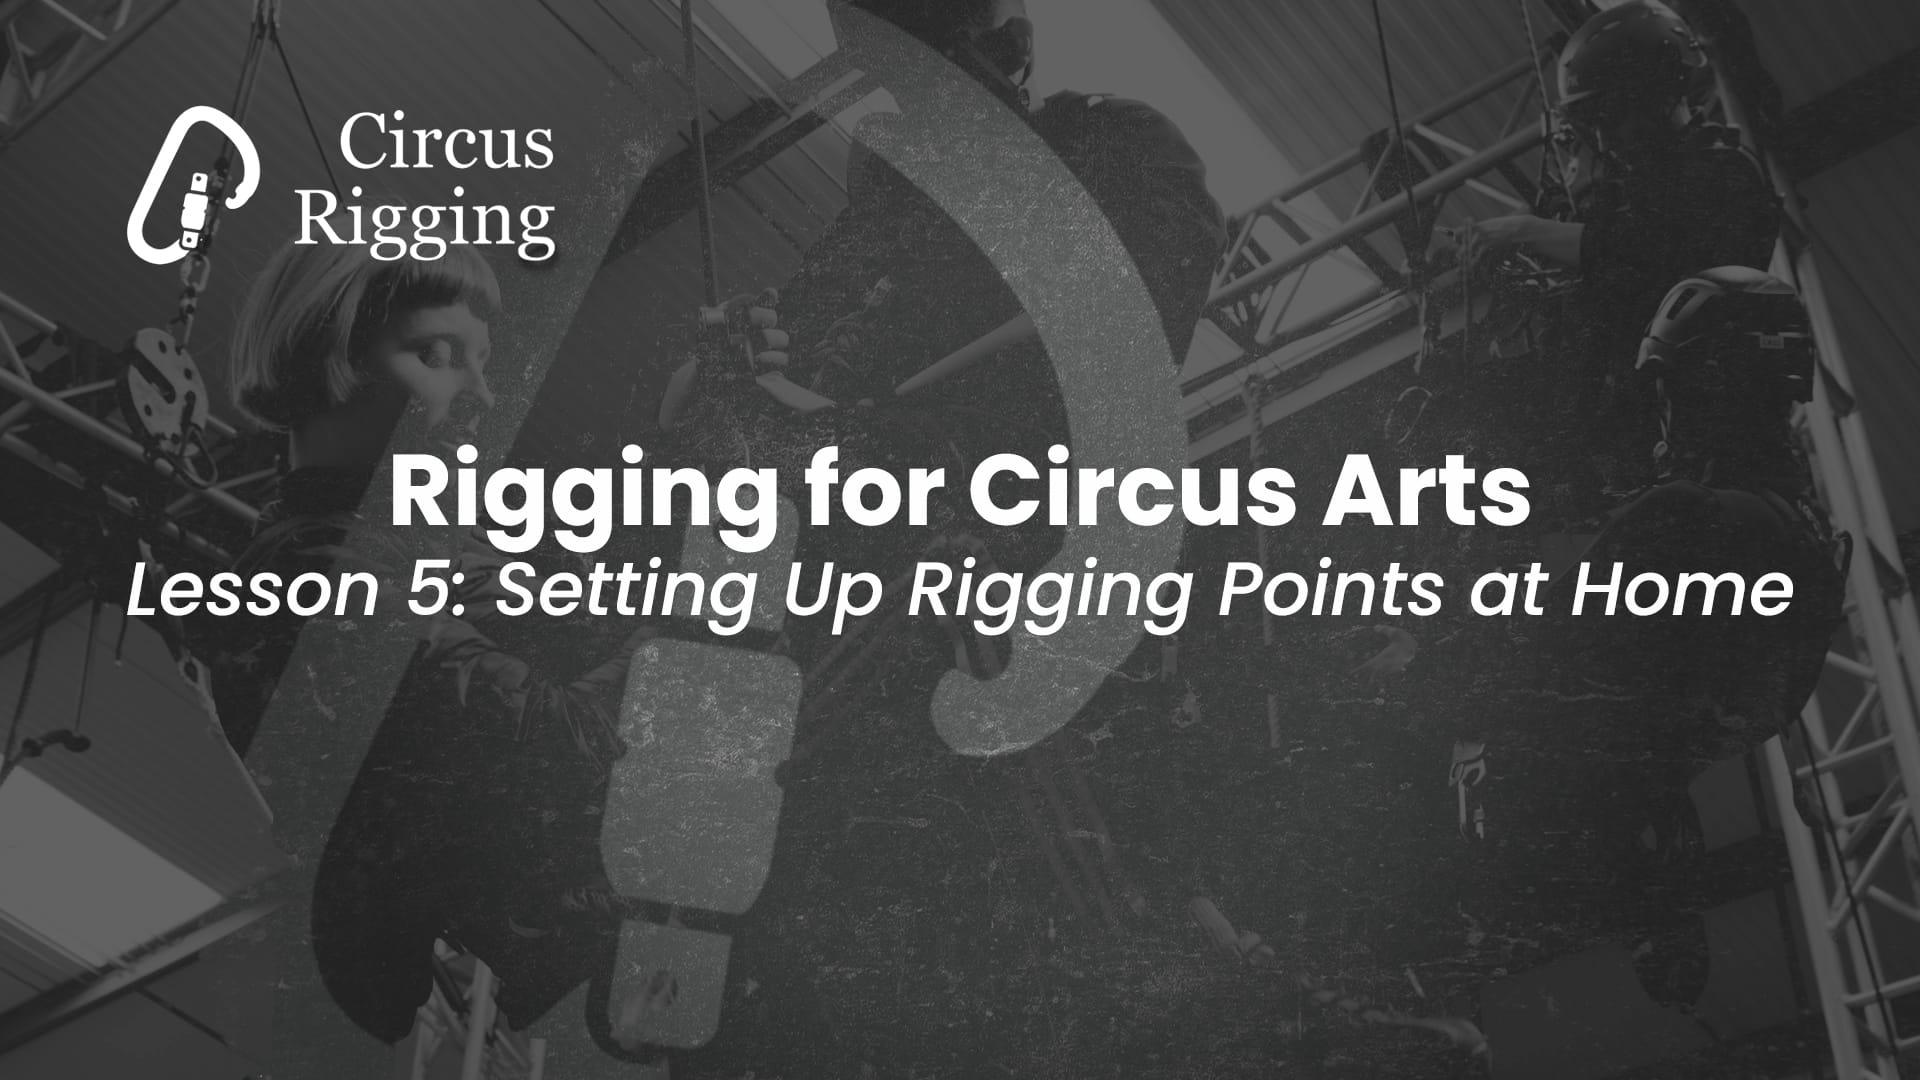 Lesson 5: Setting Up Rigging Points at Home